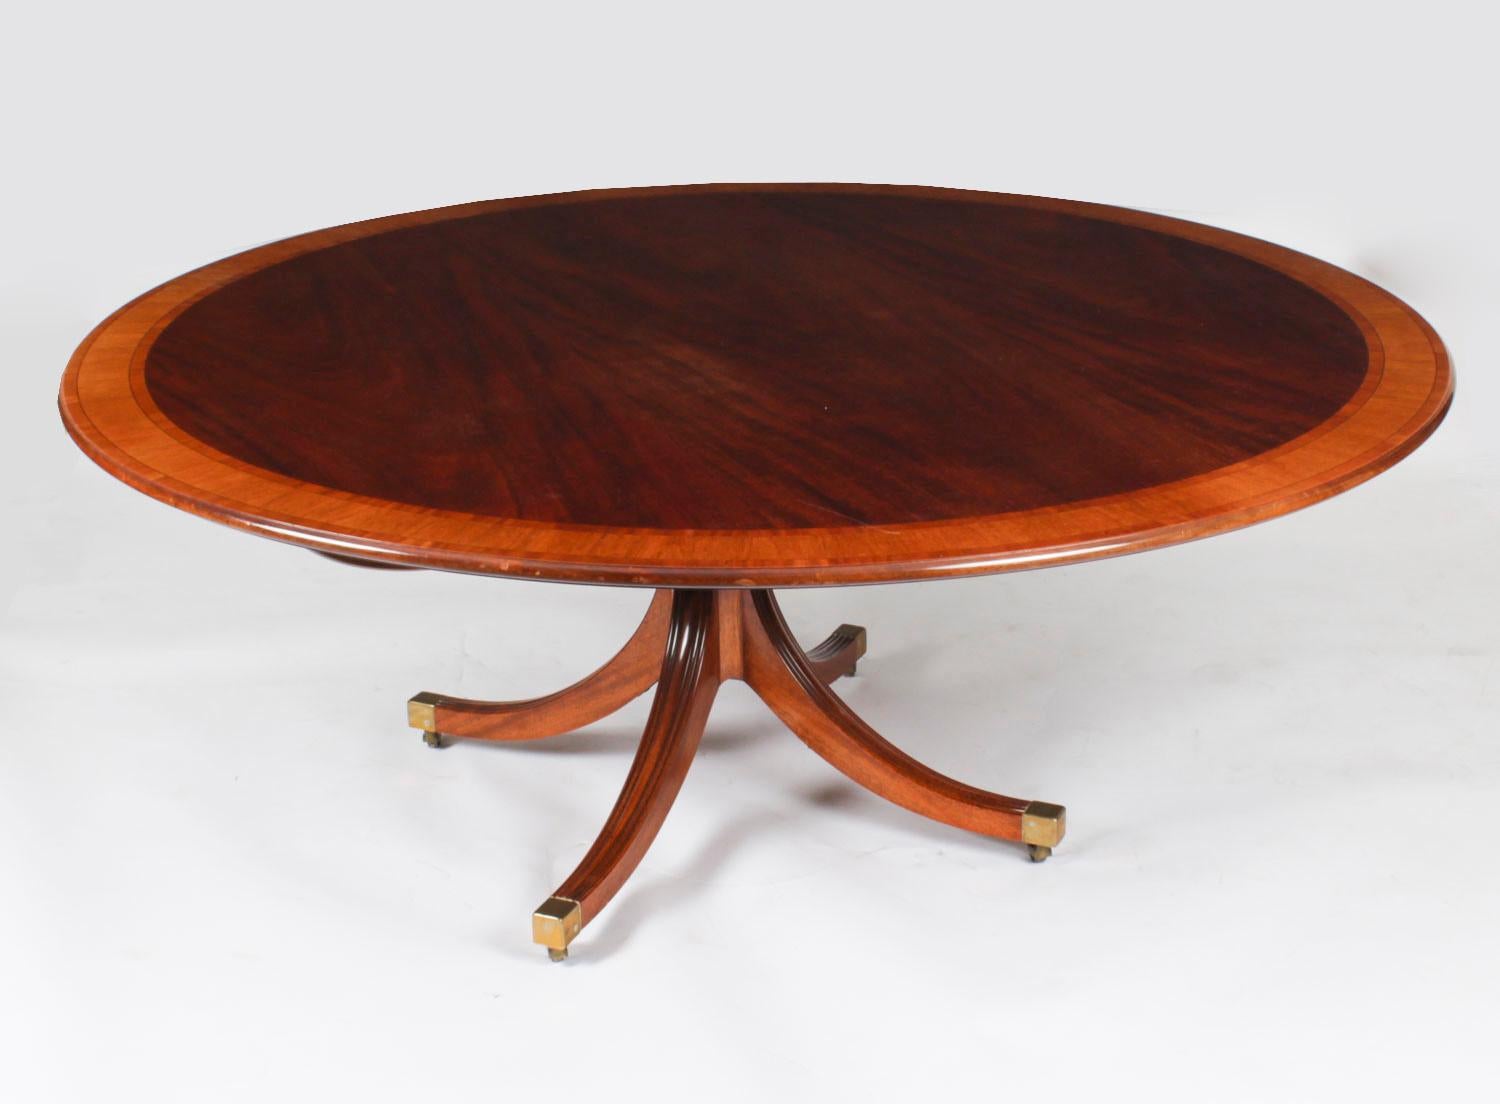 This is a  fabulous vintage Regency Revival dining table, made  by the master cabinet maker William Tillman in the 1980s and bearing his label. 

The beautiful circular dining table has a tilt top and is made of  flame mahogany with satinwood